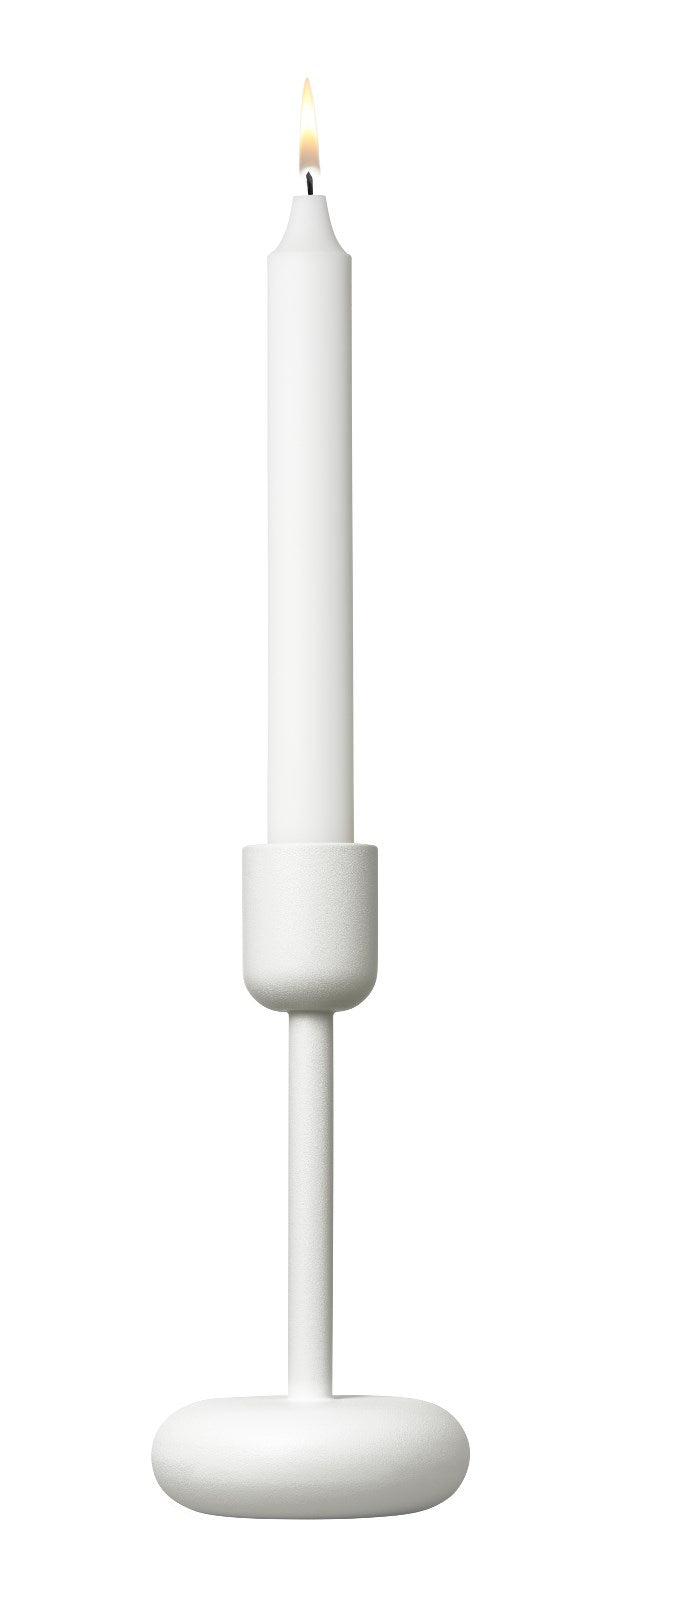 media image for Nappula Candleholder in Various Sizes & Colors design by Matti Klenell for Iittala 256